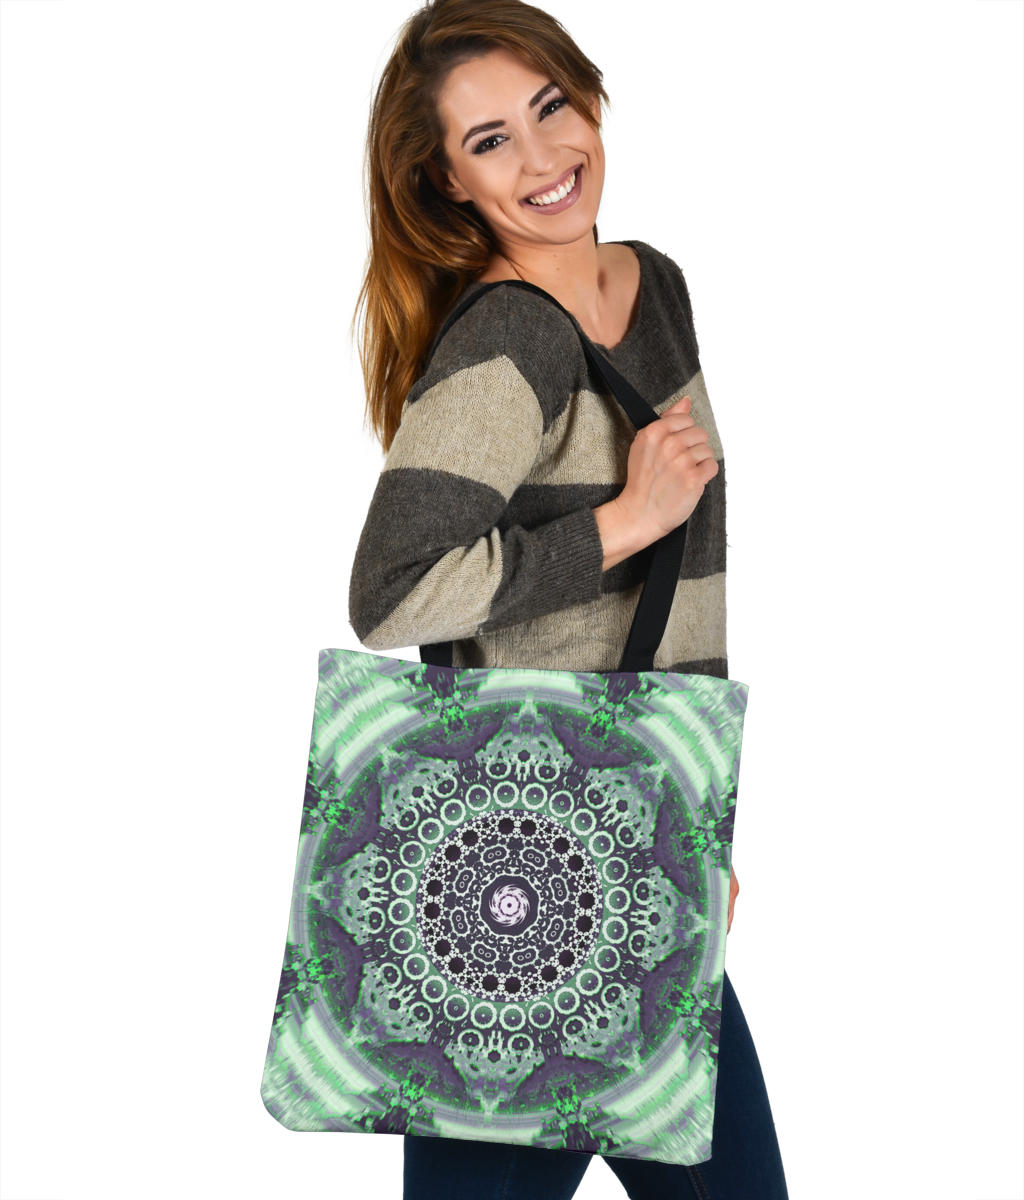 Variations on a Star: 13 | Tote Bag | Makroverset